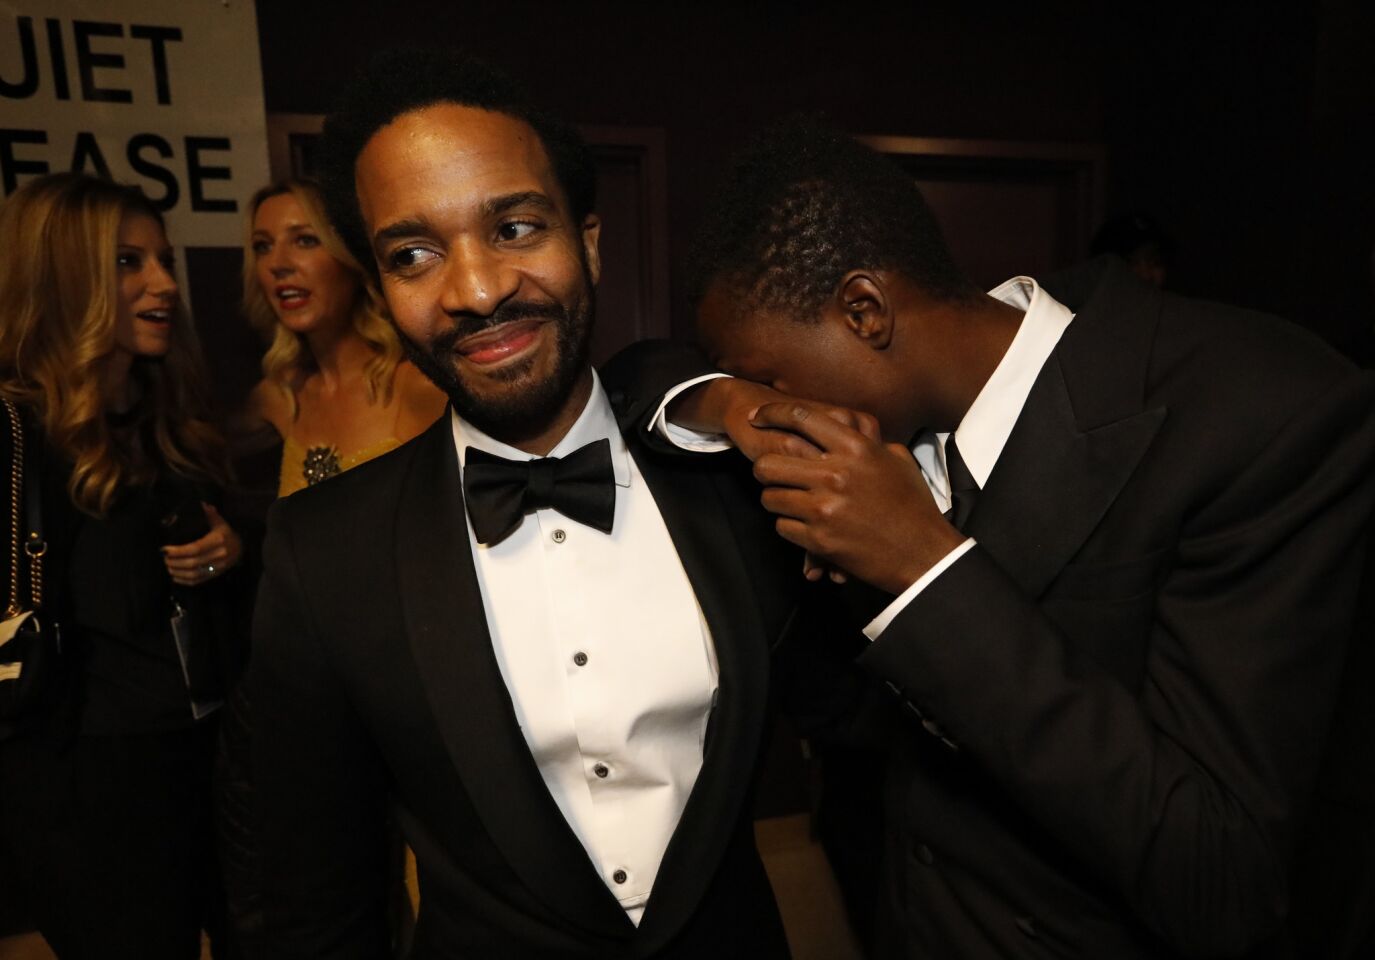 "Moonlight" actors Andre Holland, left, and Ashton Sanders backstage during the Academy Awards telecast on Feb. 26.